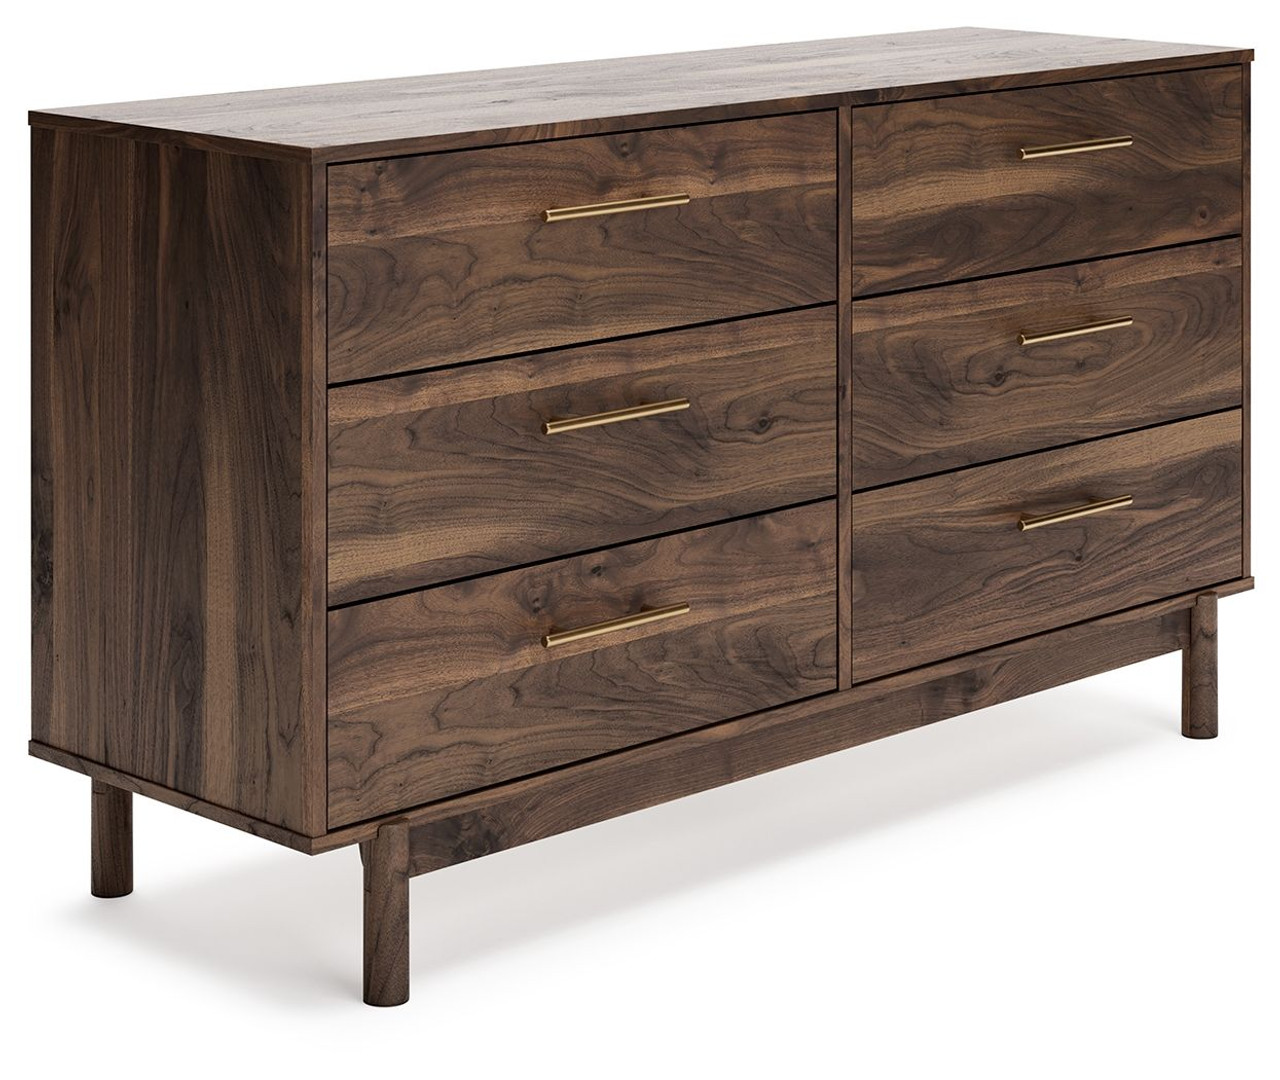 The Calverson Mocha Six Drawer Dresser Medium is available at Select